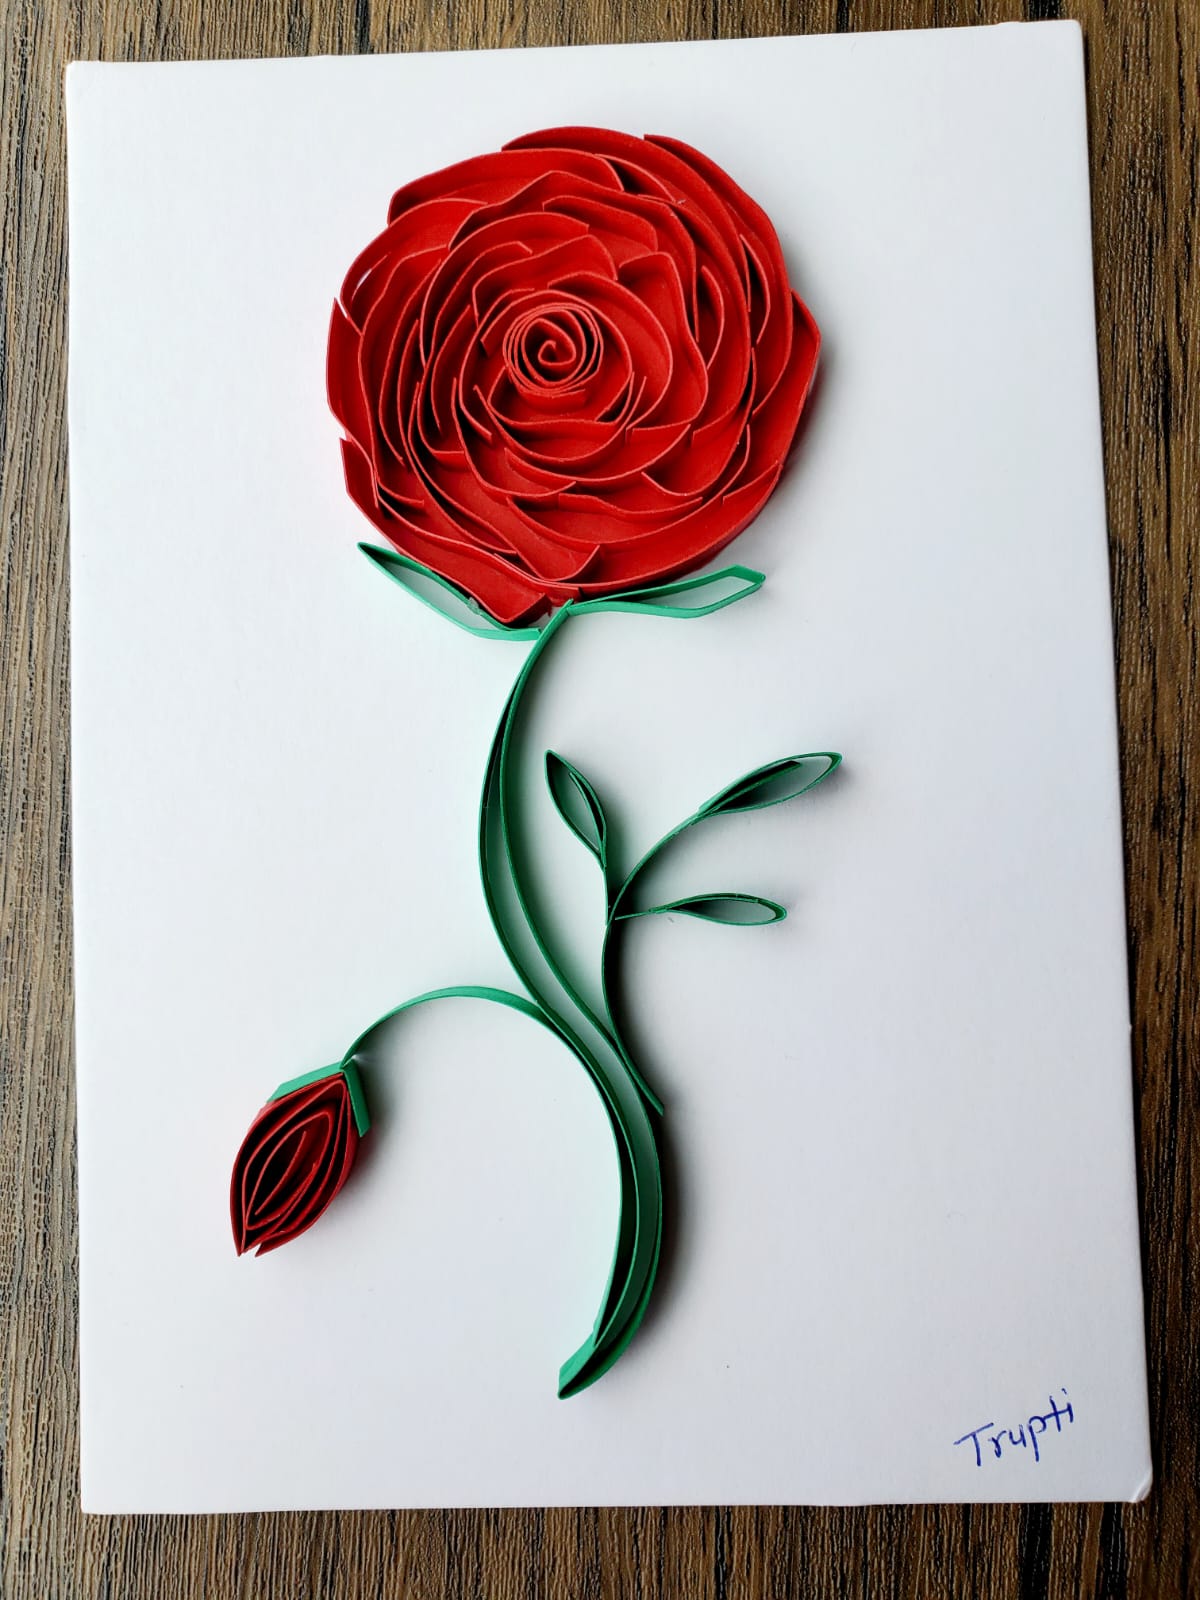 A Paper Quilling Red Rose Frame experience project by Yaymaker